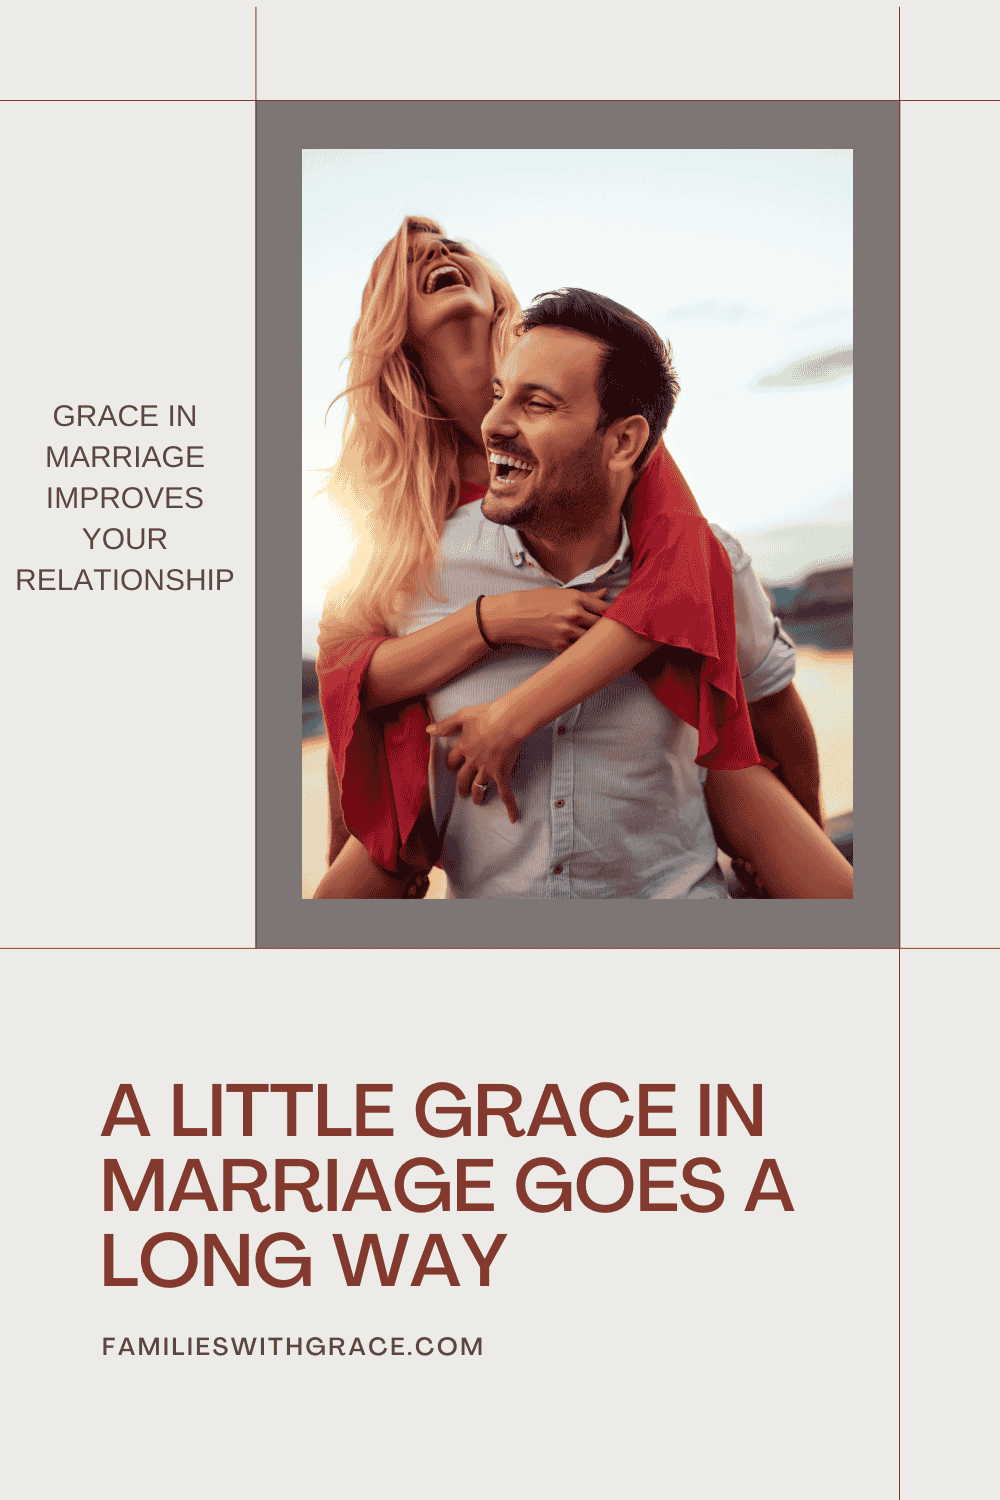 A little grace in marriage goes a long way to avoid conflict